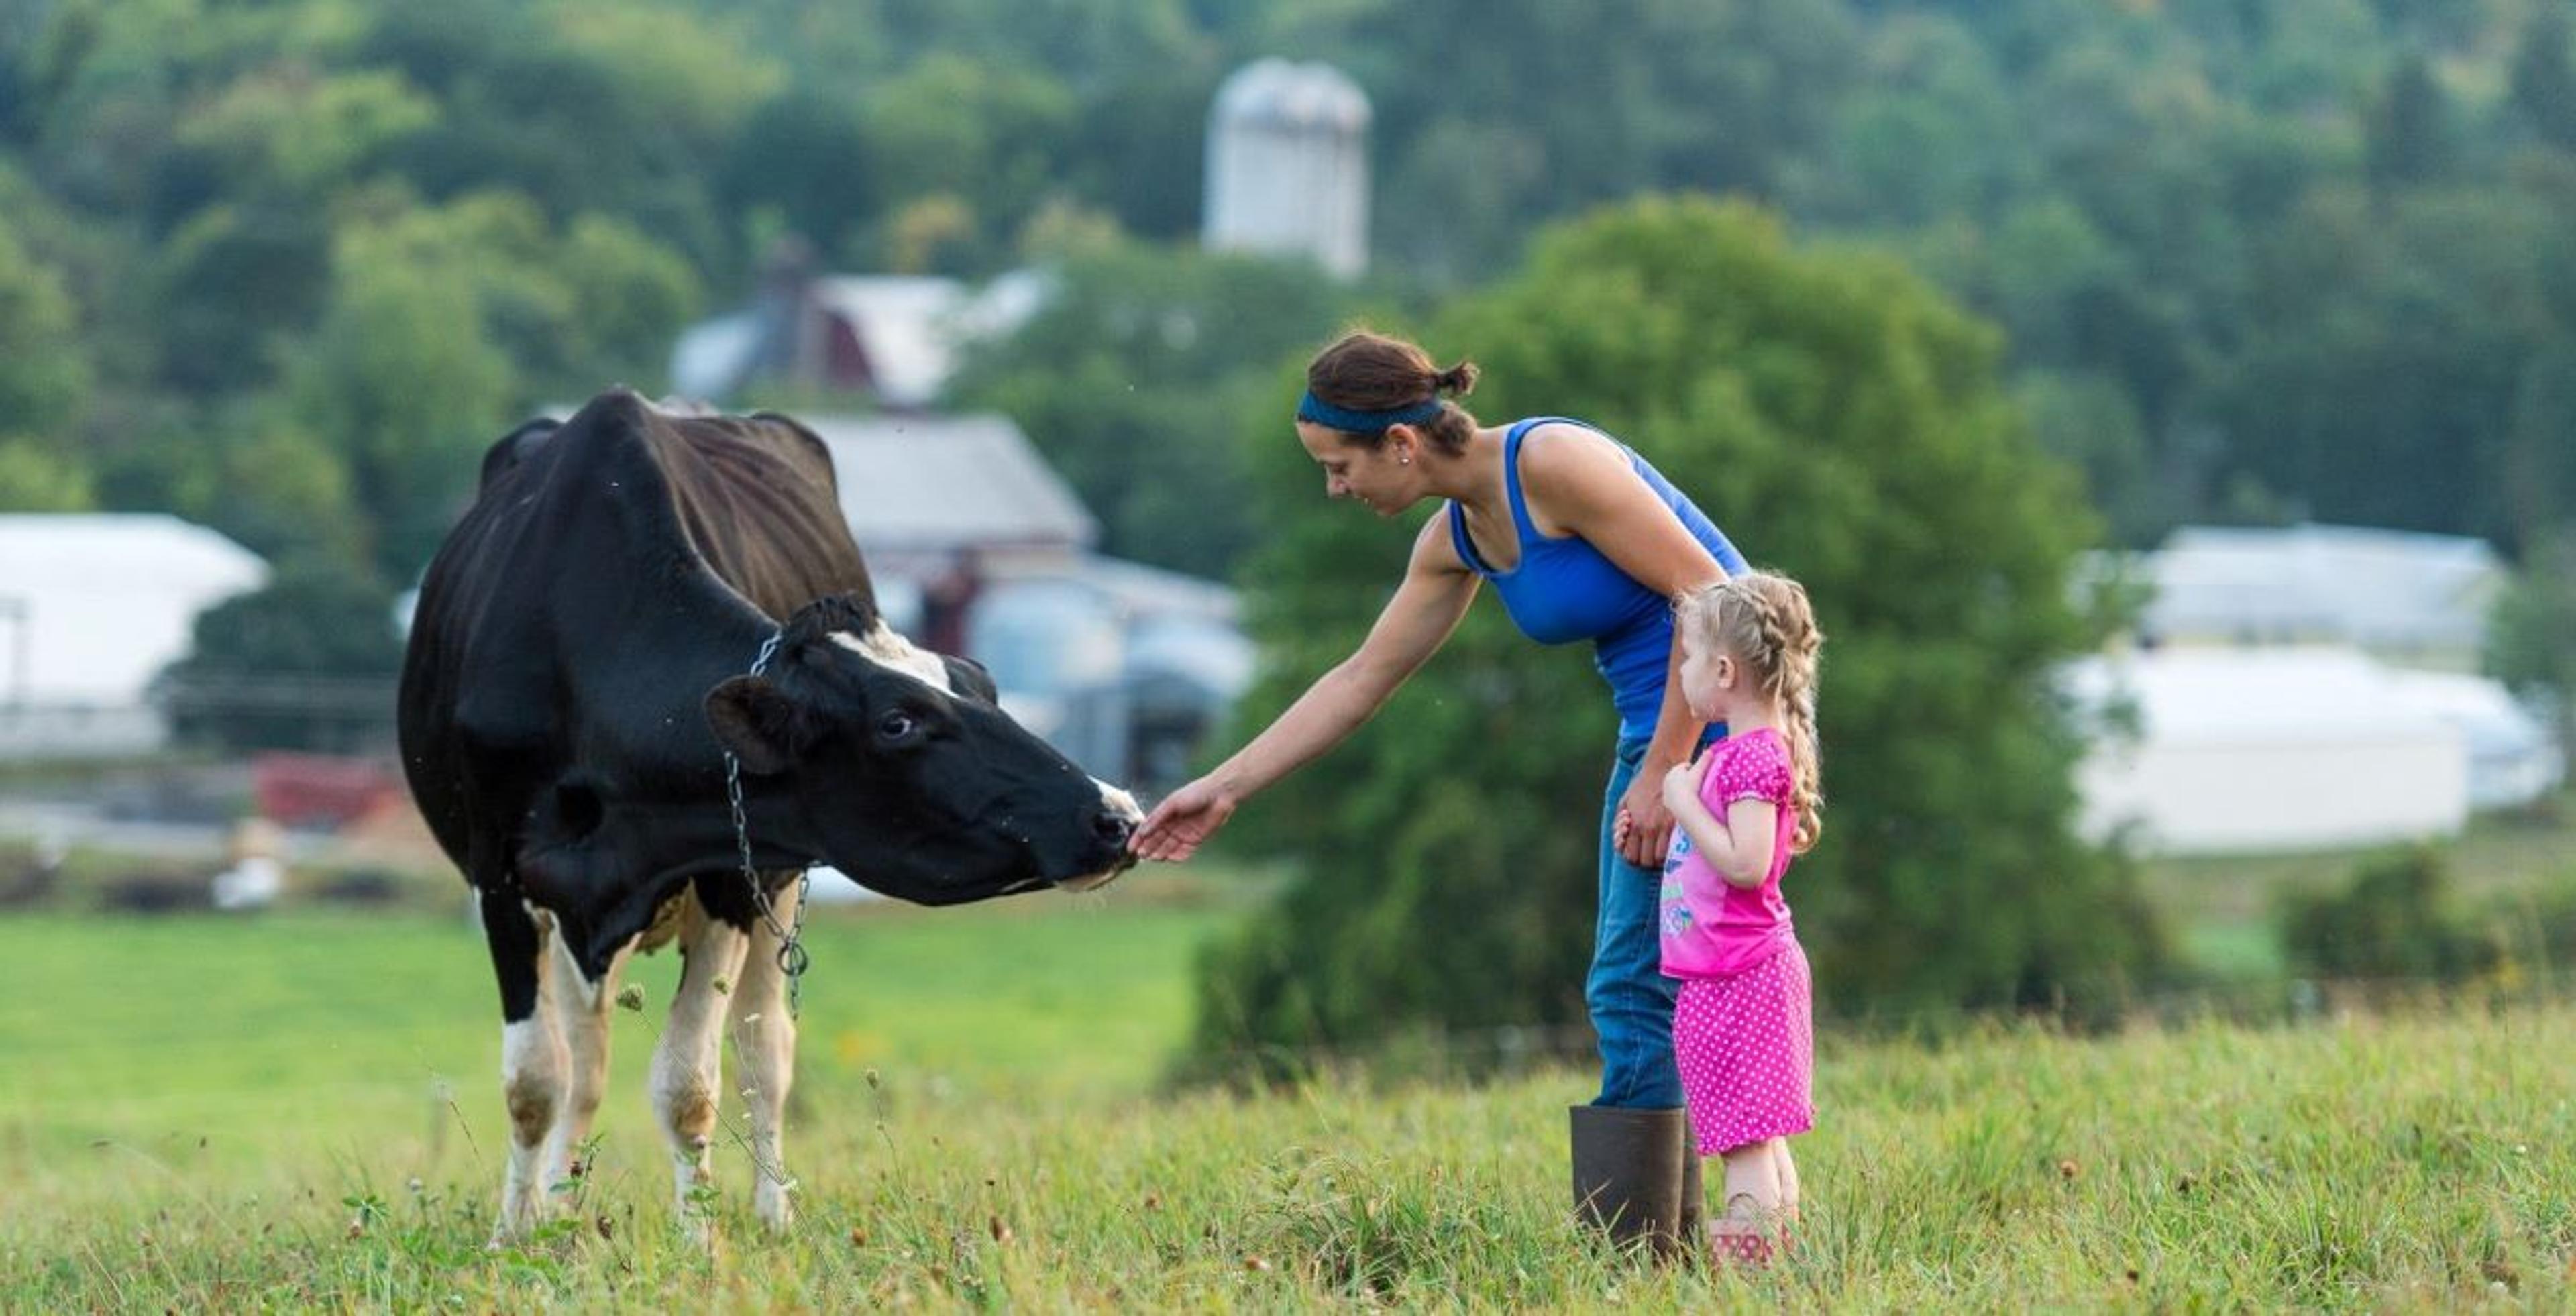 A woman reaches out to a dairy cow at the Miller family's organic dairy farm in New York. A girl stands next to her.